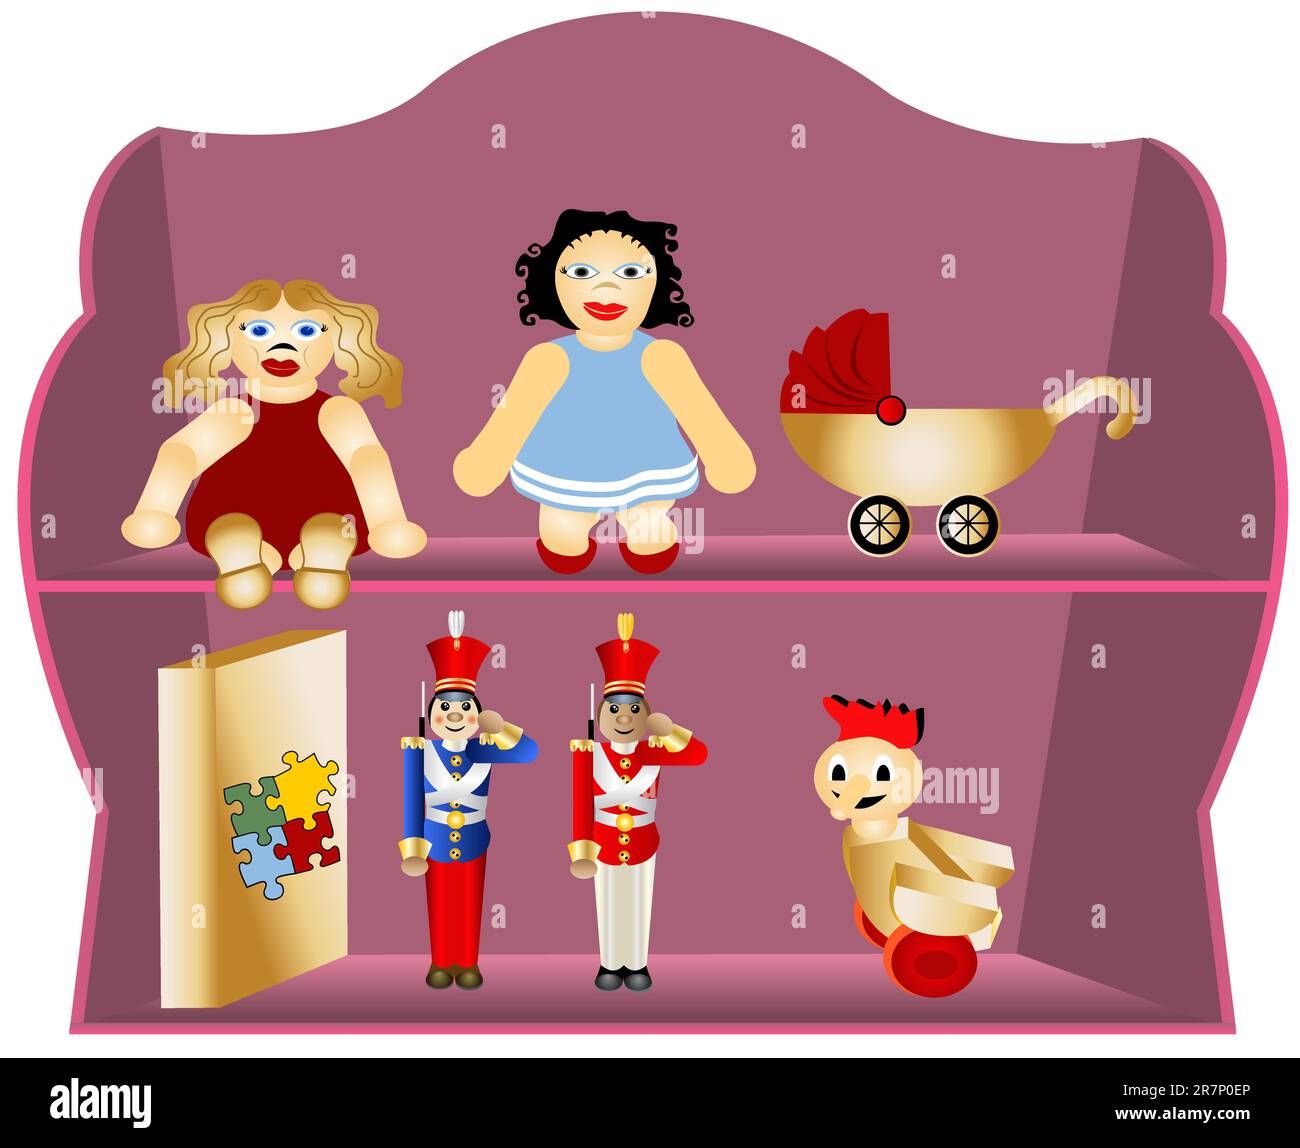 Illustration of a purple shelf with different children toys. Stock Vector